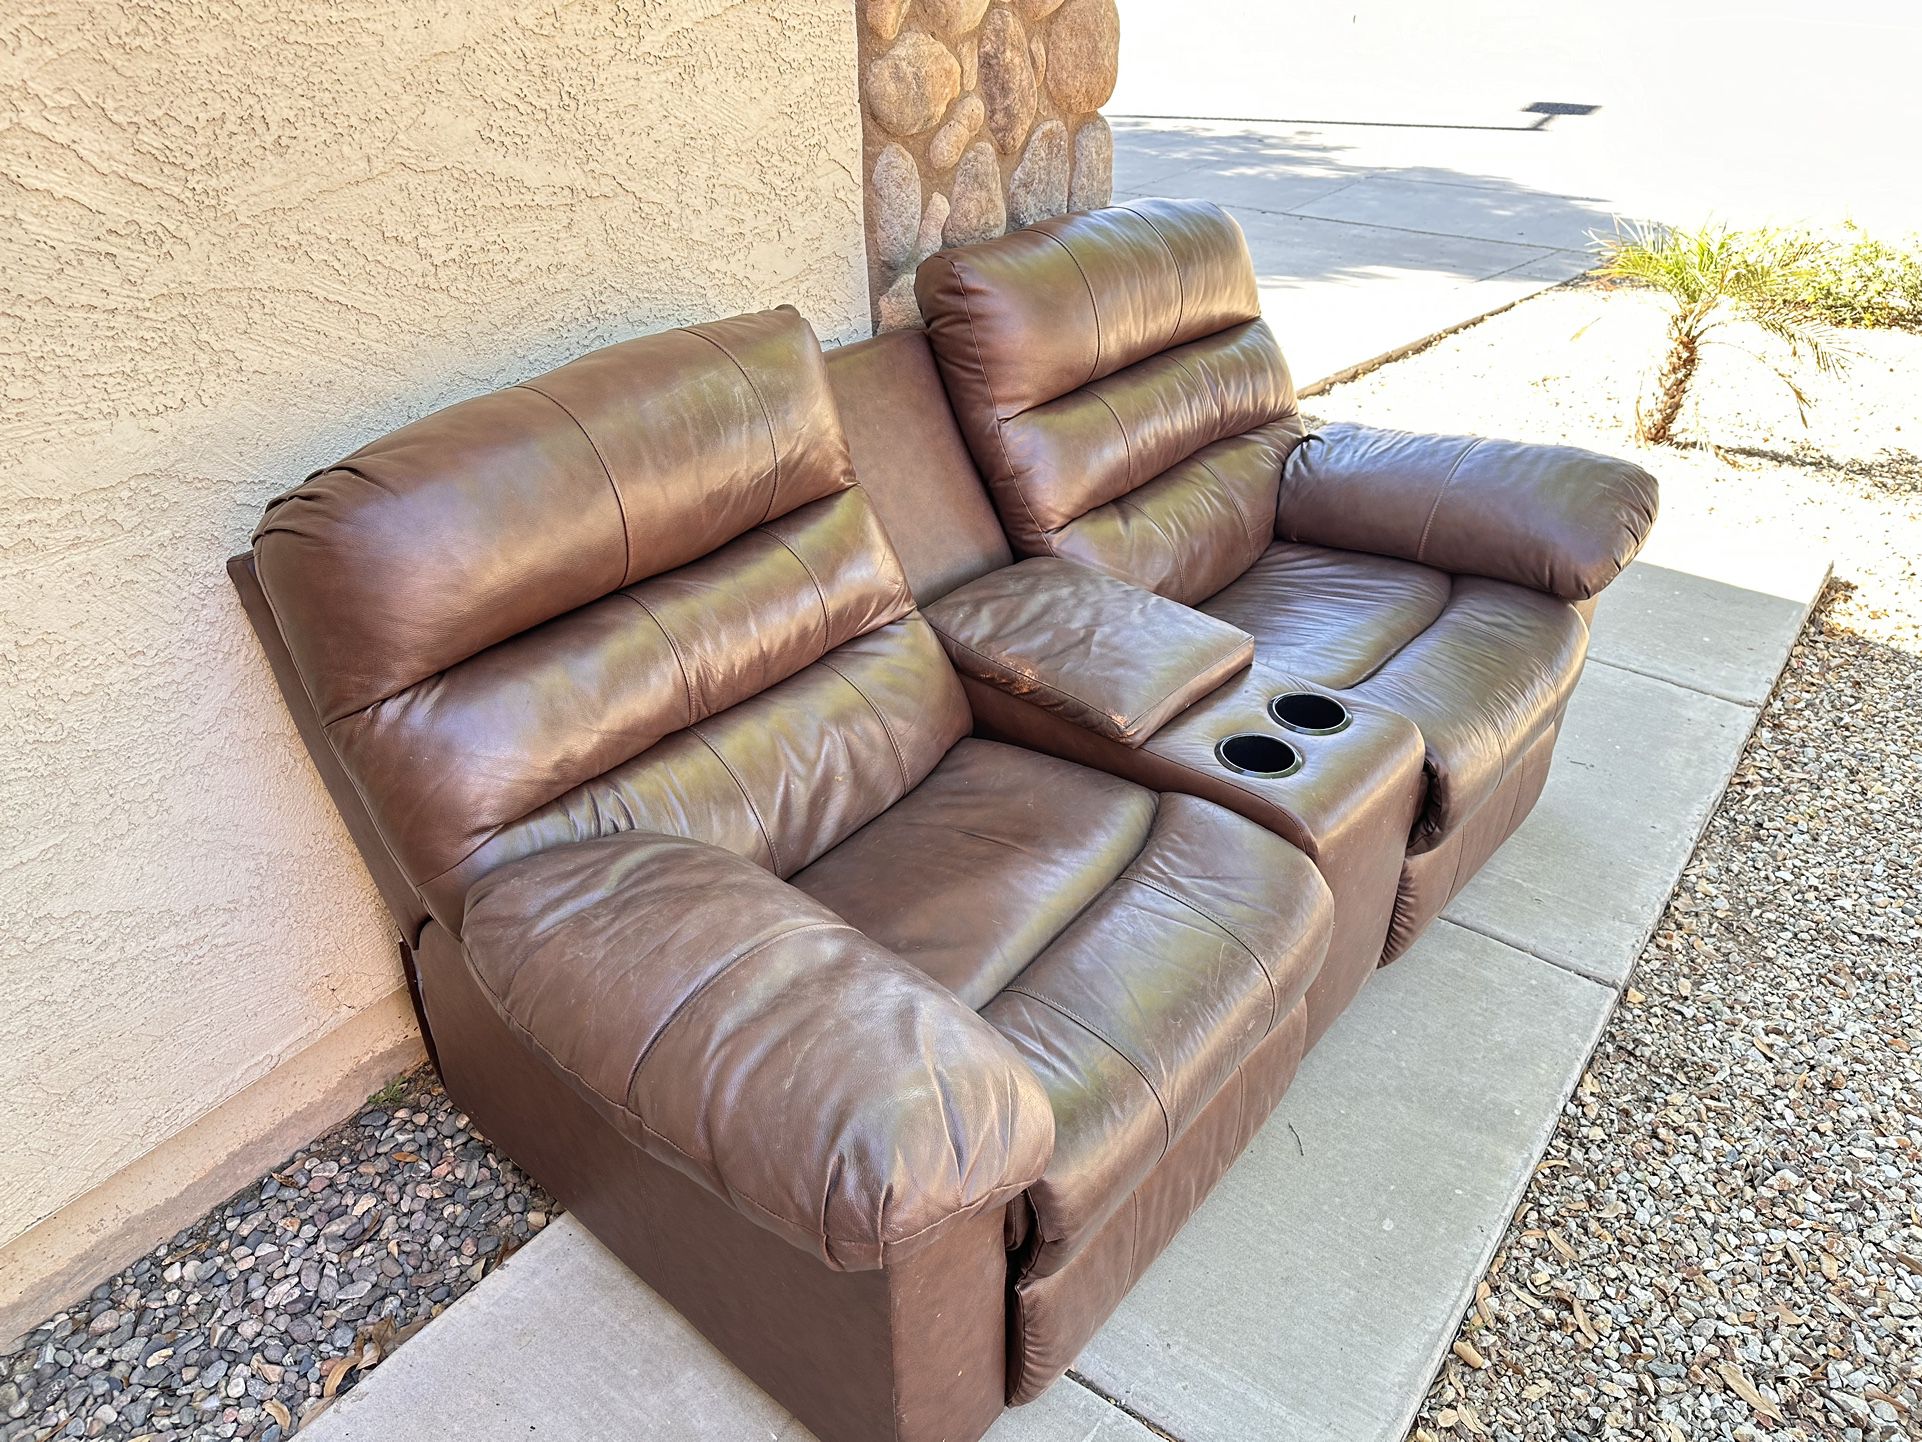 Free Loveseat Couch